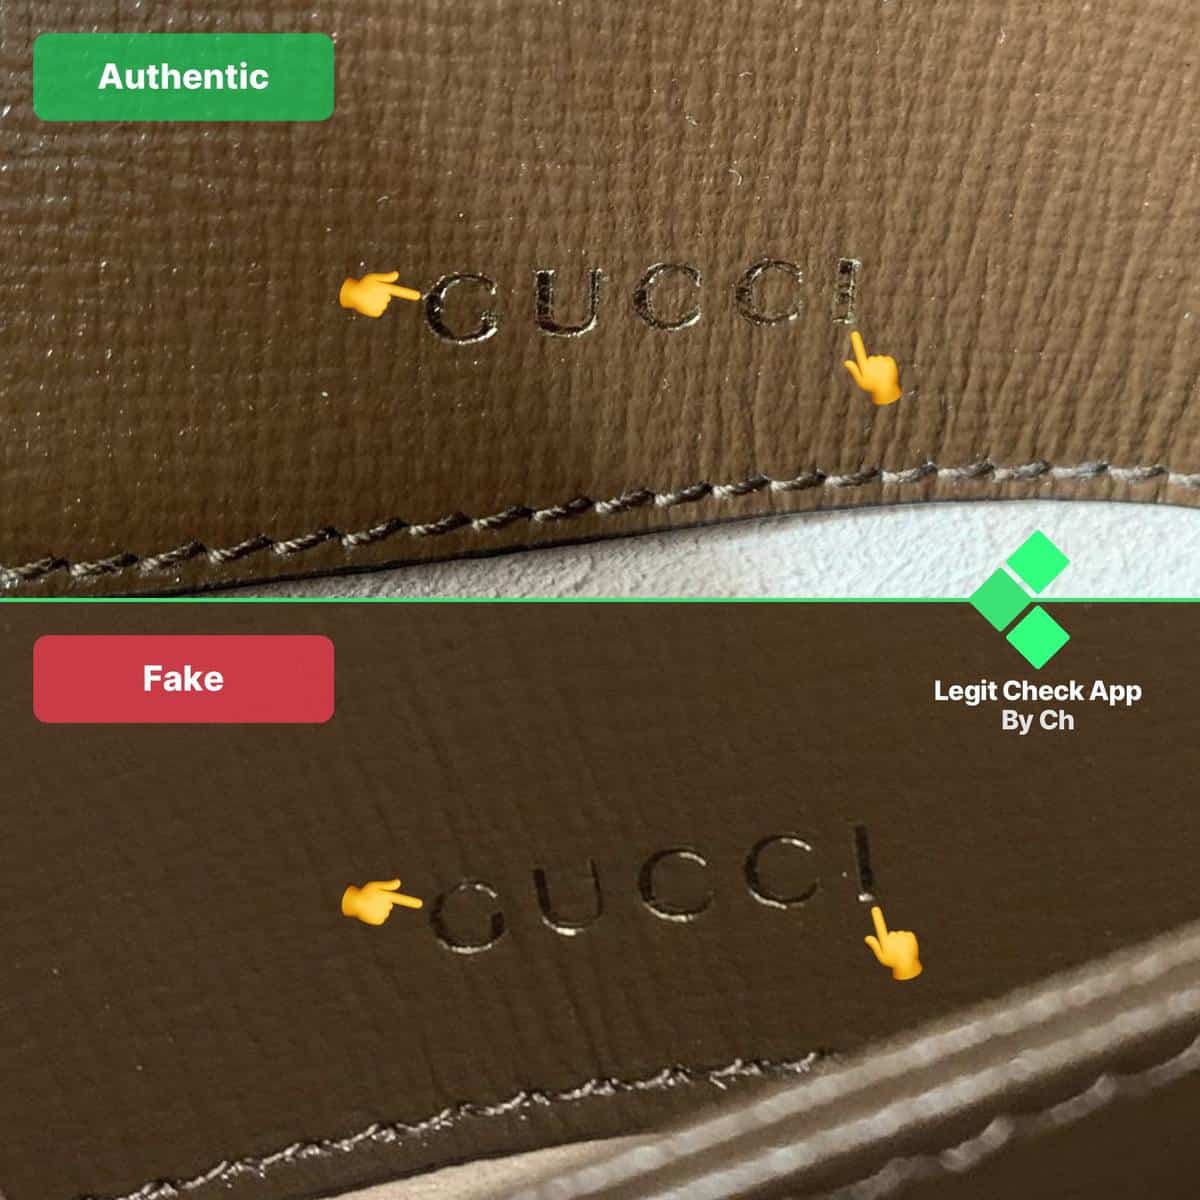 Gucci Horsebit Bag Fake Vs Real (Authentication Guide) - Legit Check By Ch